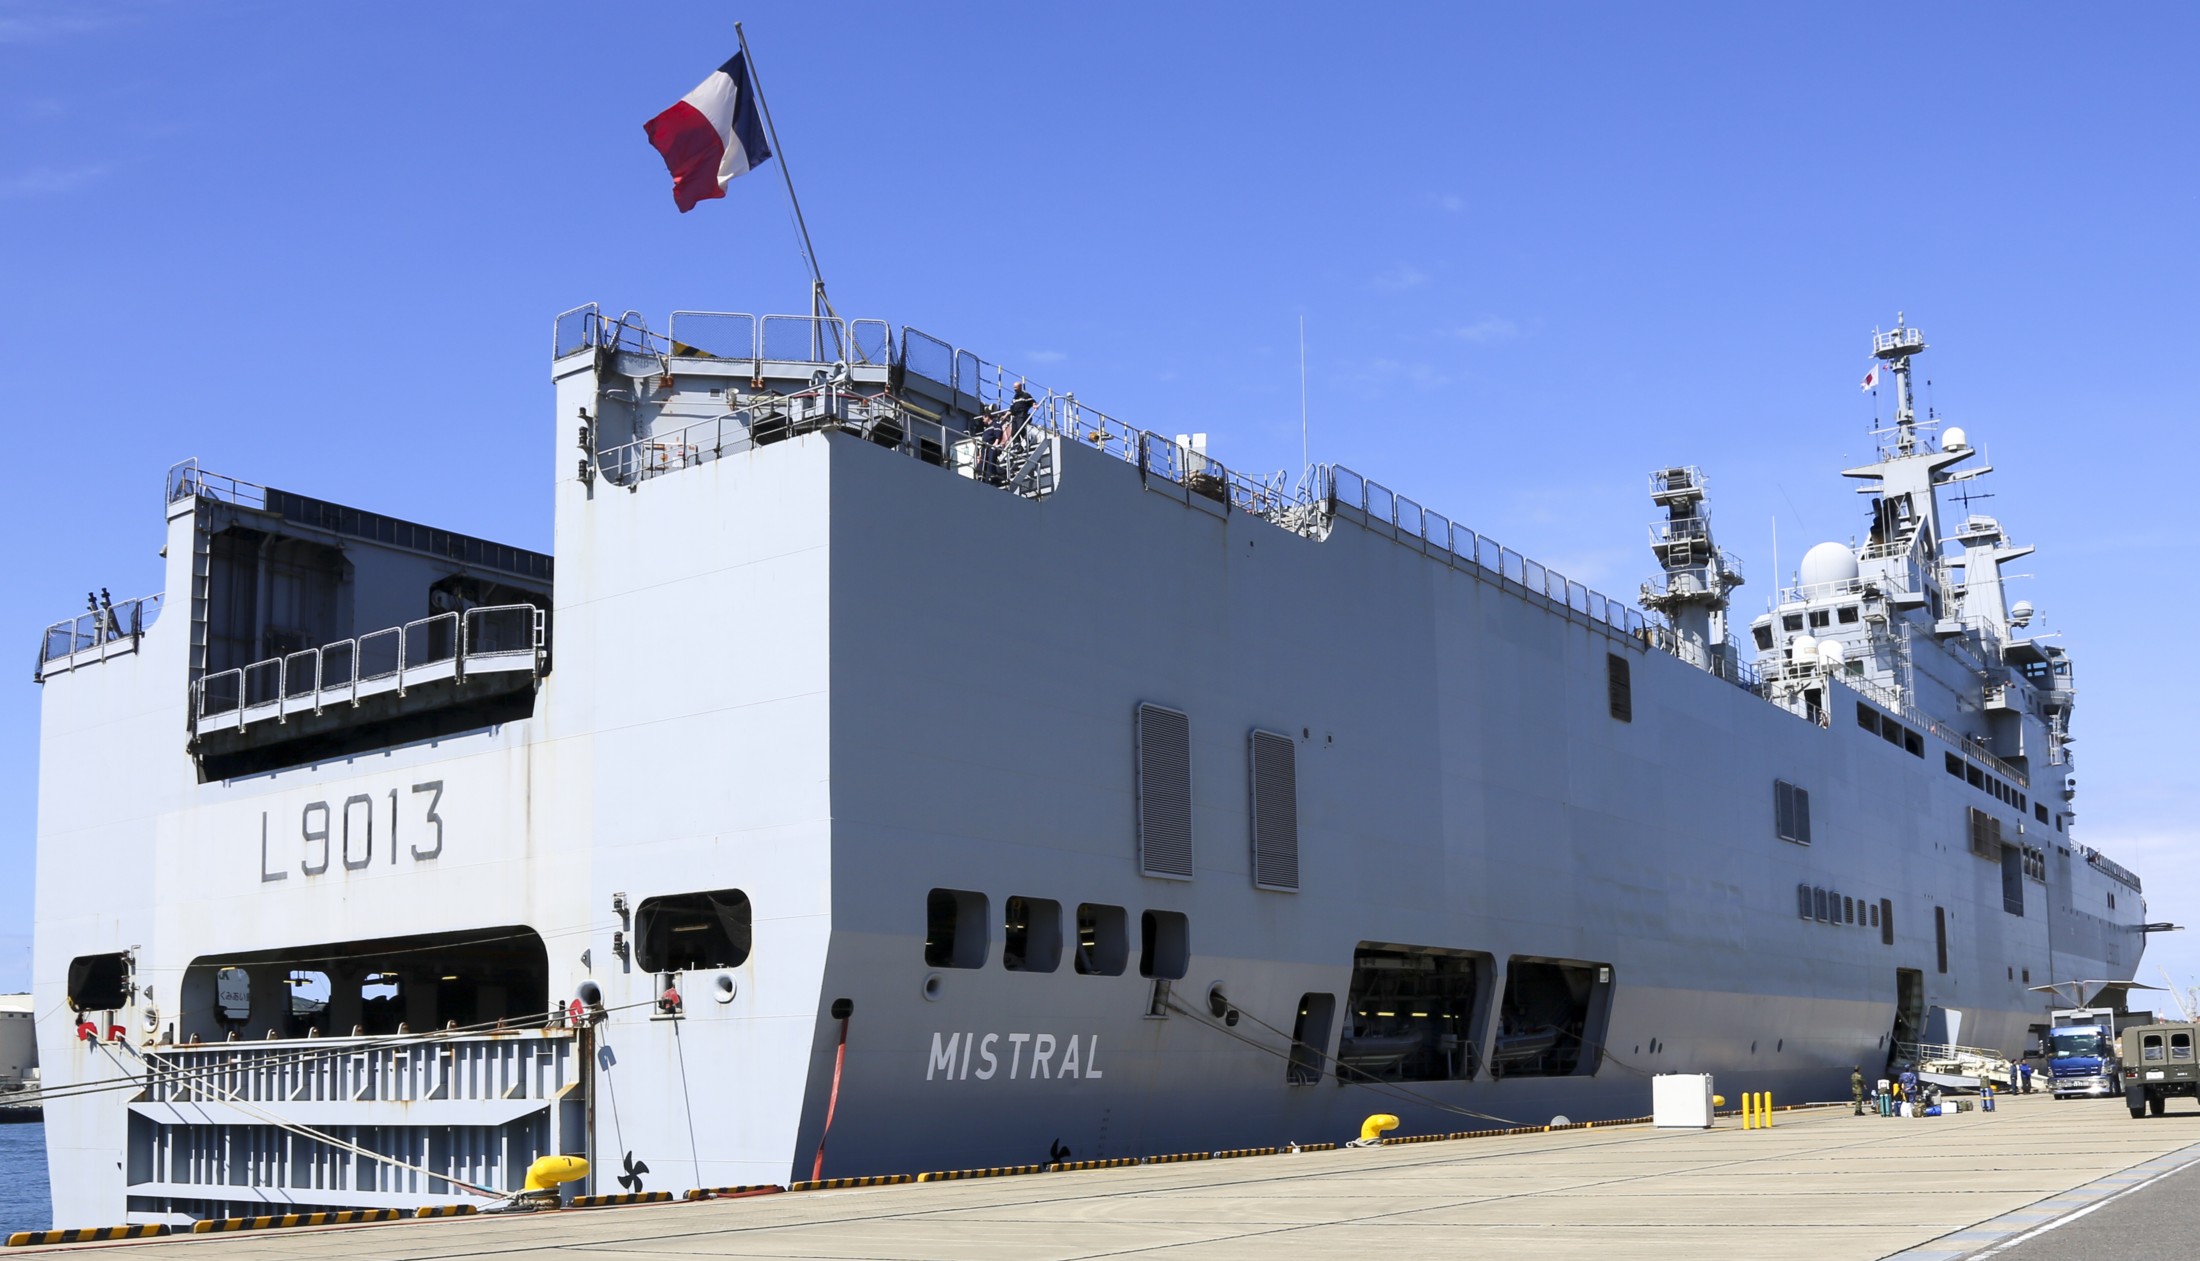 l-9013 fs mistral amphibious assault command ship french navy marine nationale 54